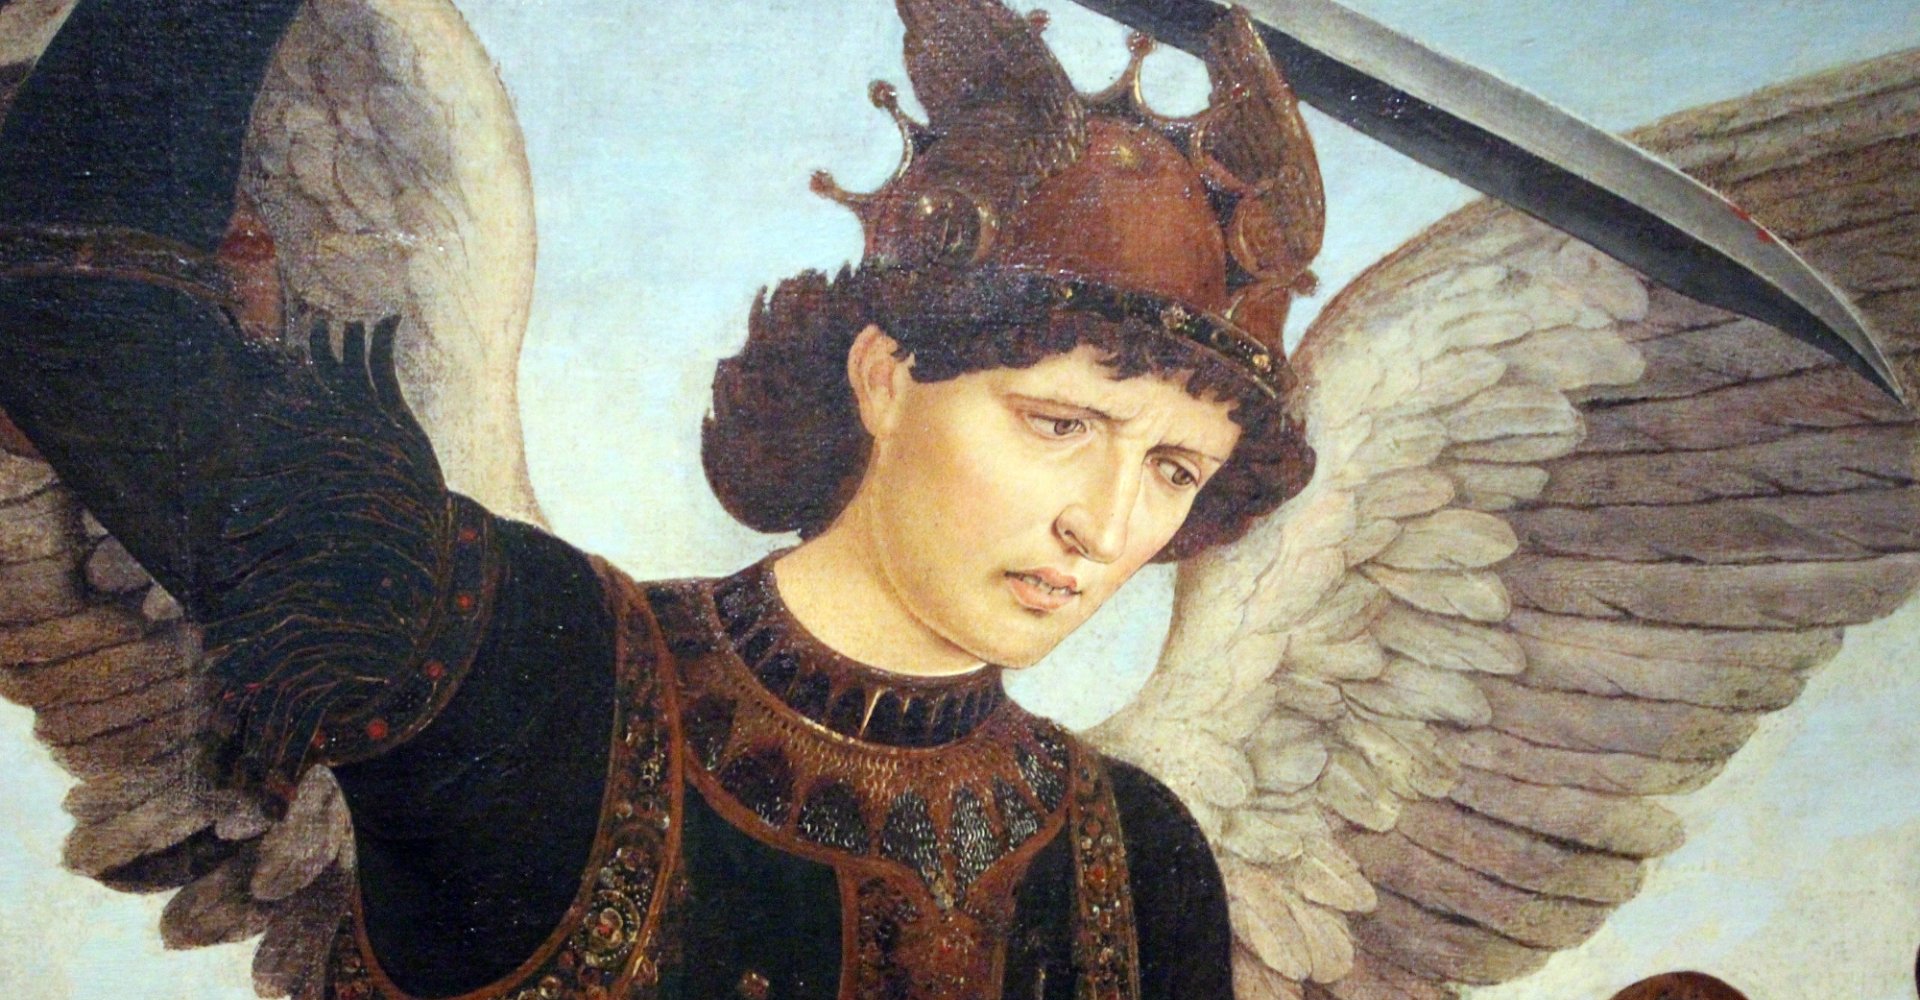 St. Michael the archangel and the dragon, detail